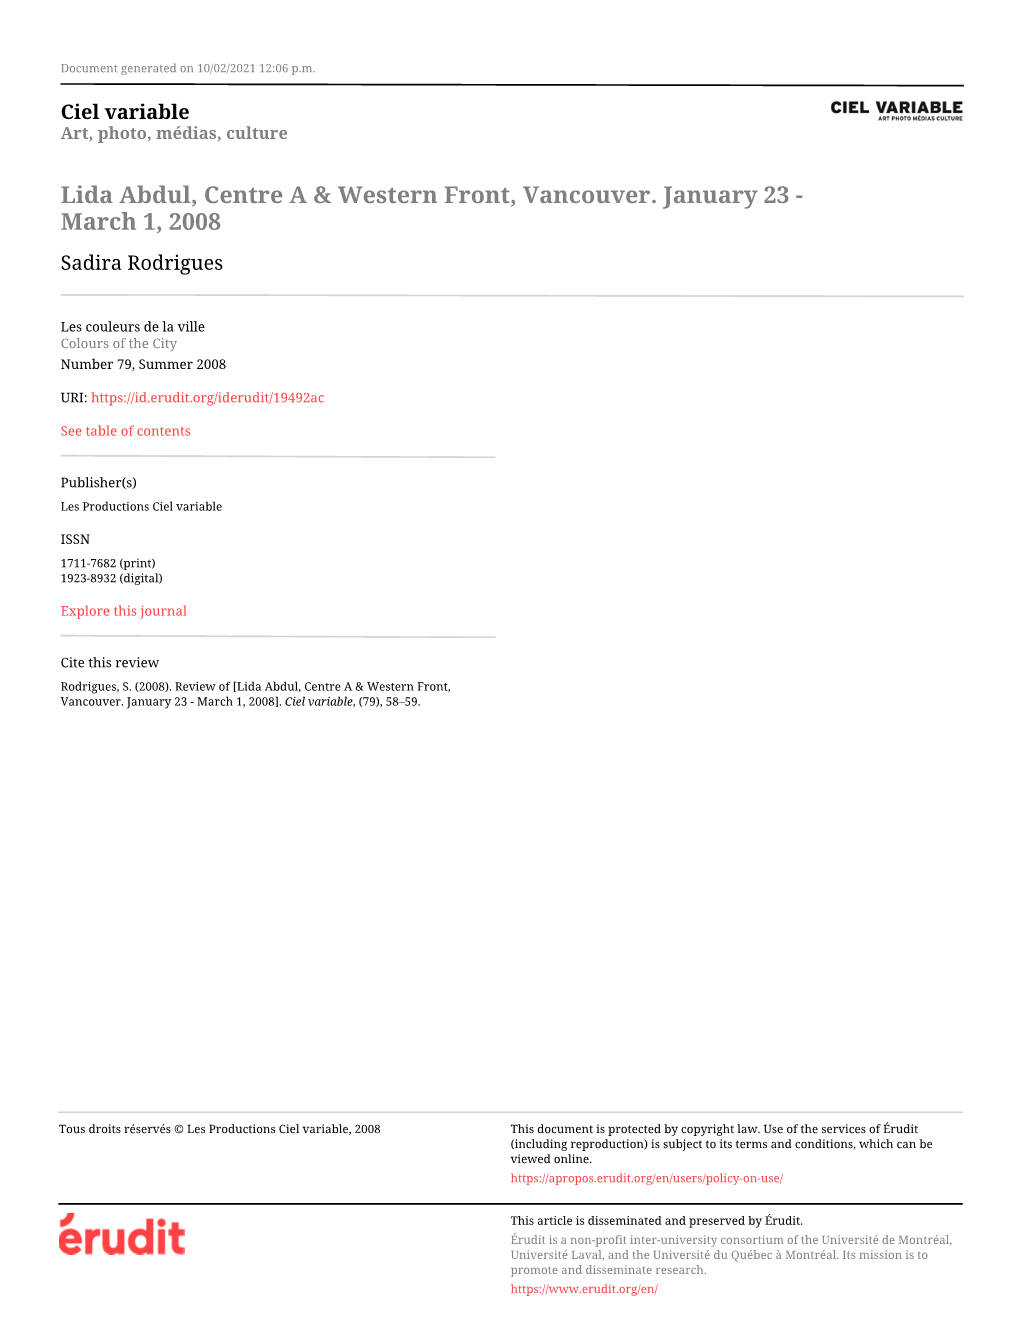 Lida Abdul, Centre a & Western Front, Vancouver. January 23